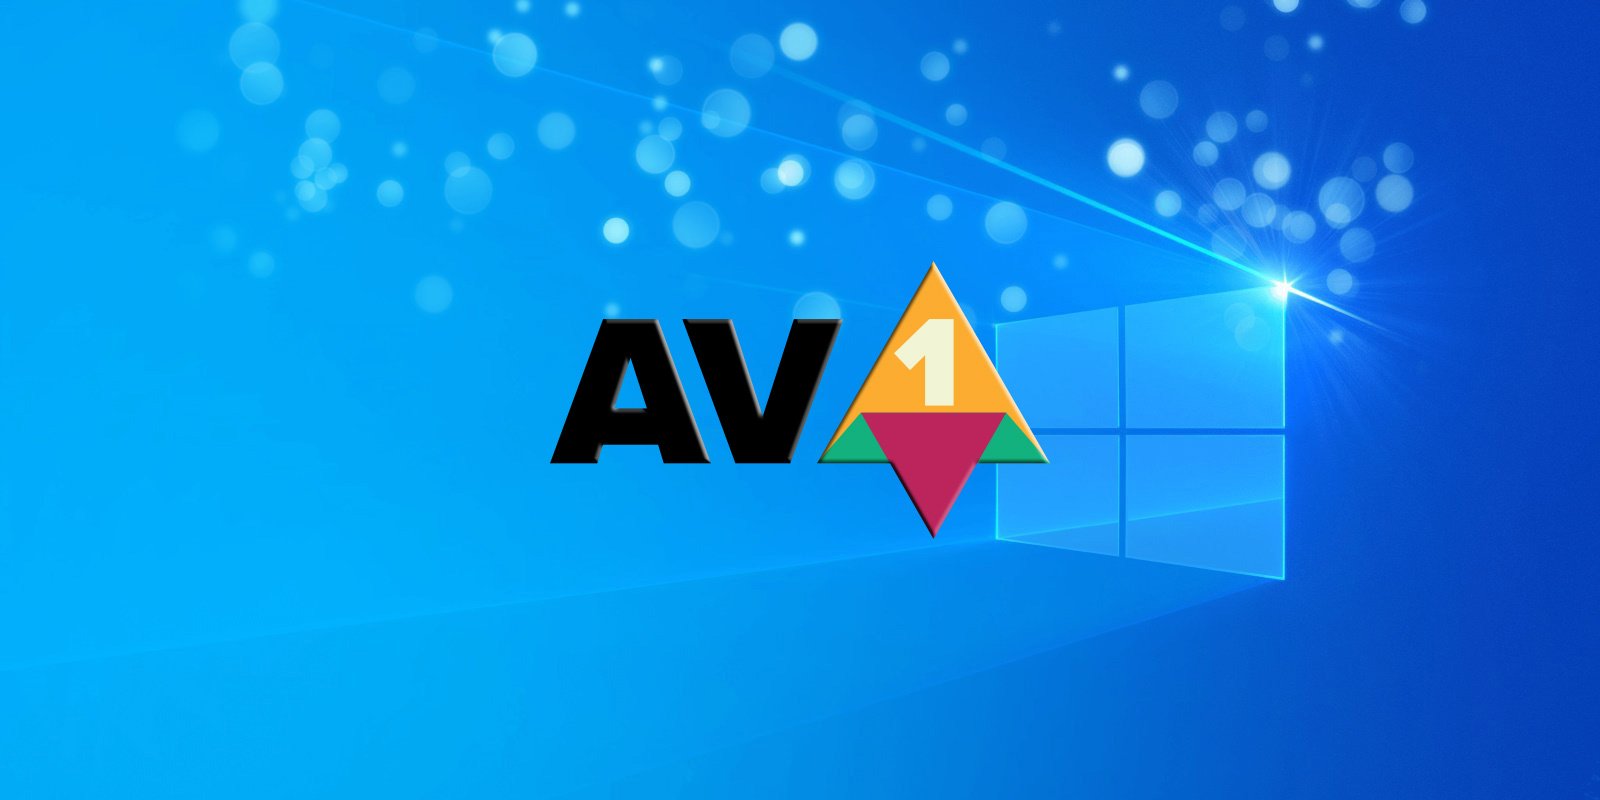 Windows 10 is getting hardware-accelerated AV1 video this fall